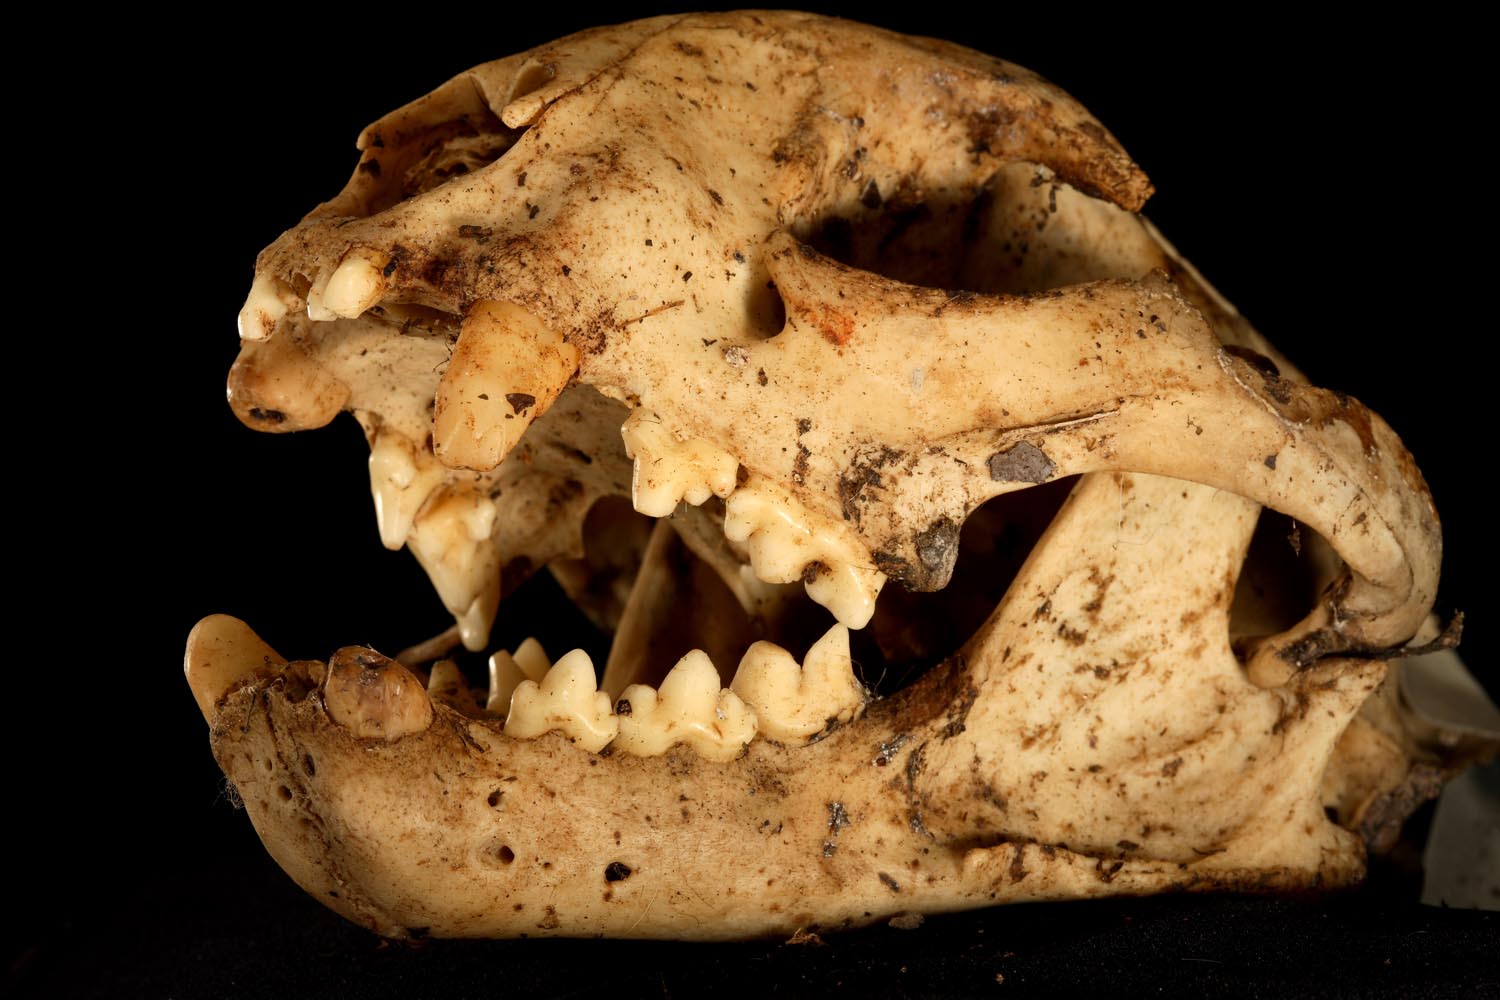 After Bobby died, researchers cleaned his skull to find all four of his canines had broken, which would have made it difficult to make a living as a predator. Bobby’s skeleton is now preserved in the New York State Museum’s Mammalogy collections.